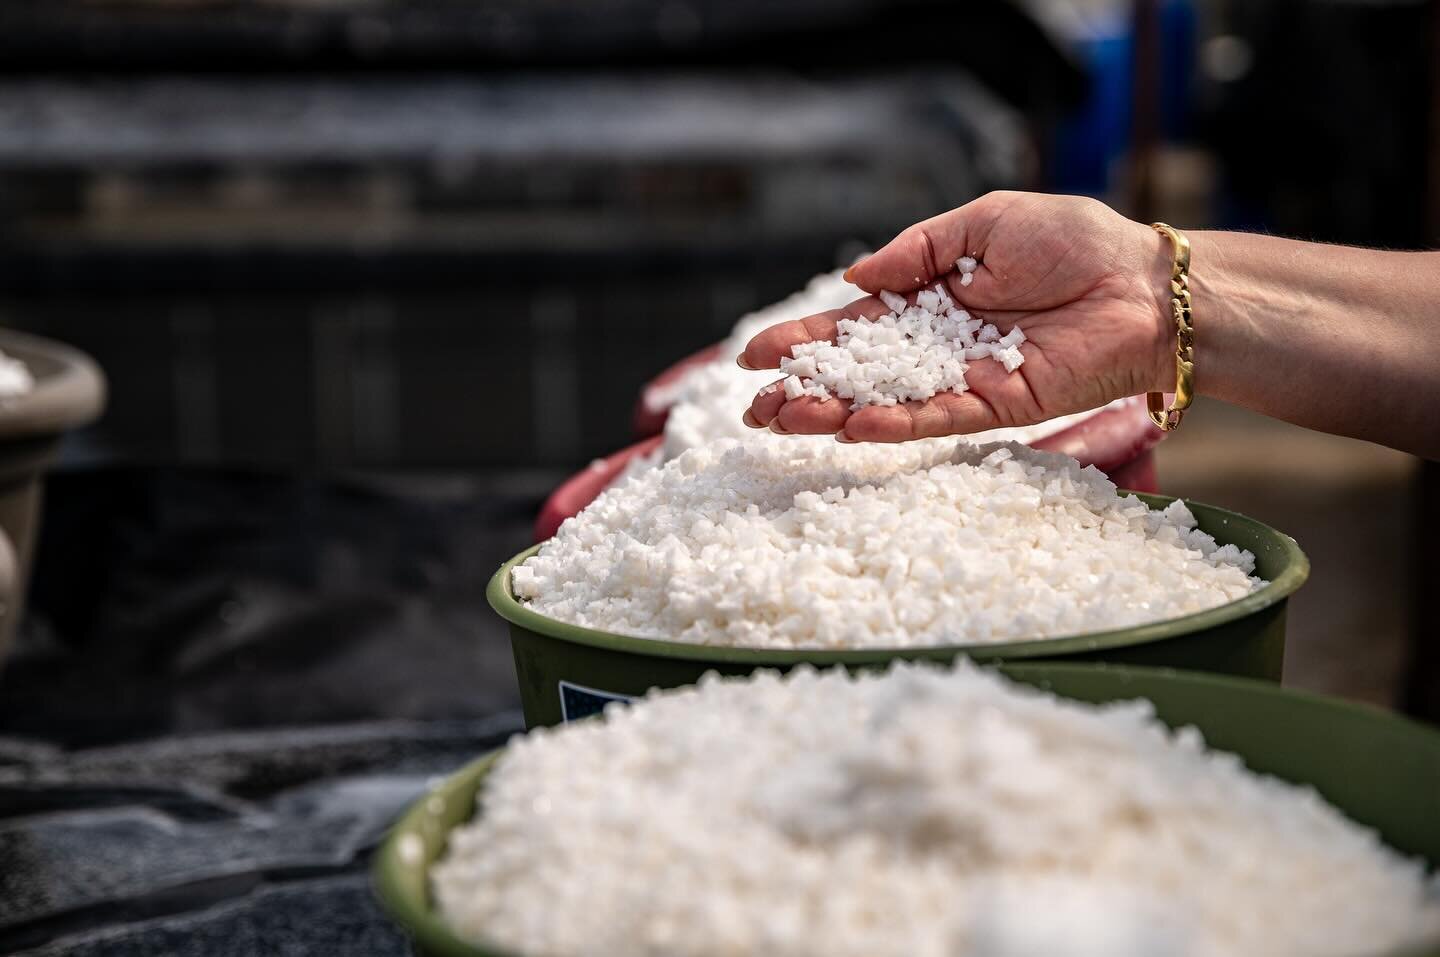 Nancy Bruns&rsquo; family has been harvesting salt from the ancient ocean trapped beneath the West Virginia hills for seven generations. Salt used to be big business in these parts &ndash; folks used it to preserve food in addition to culinary applic